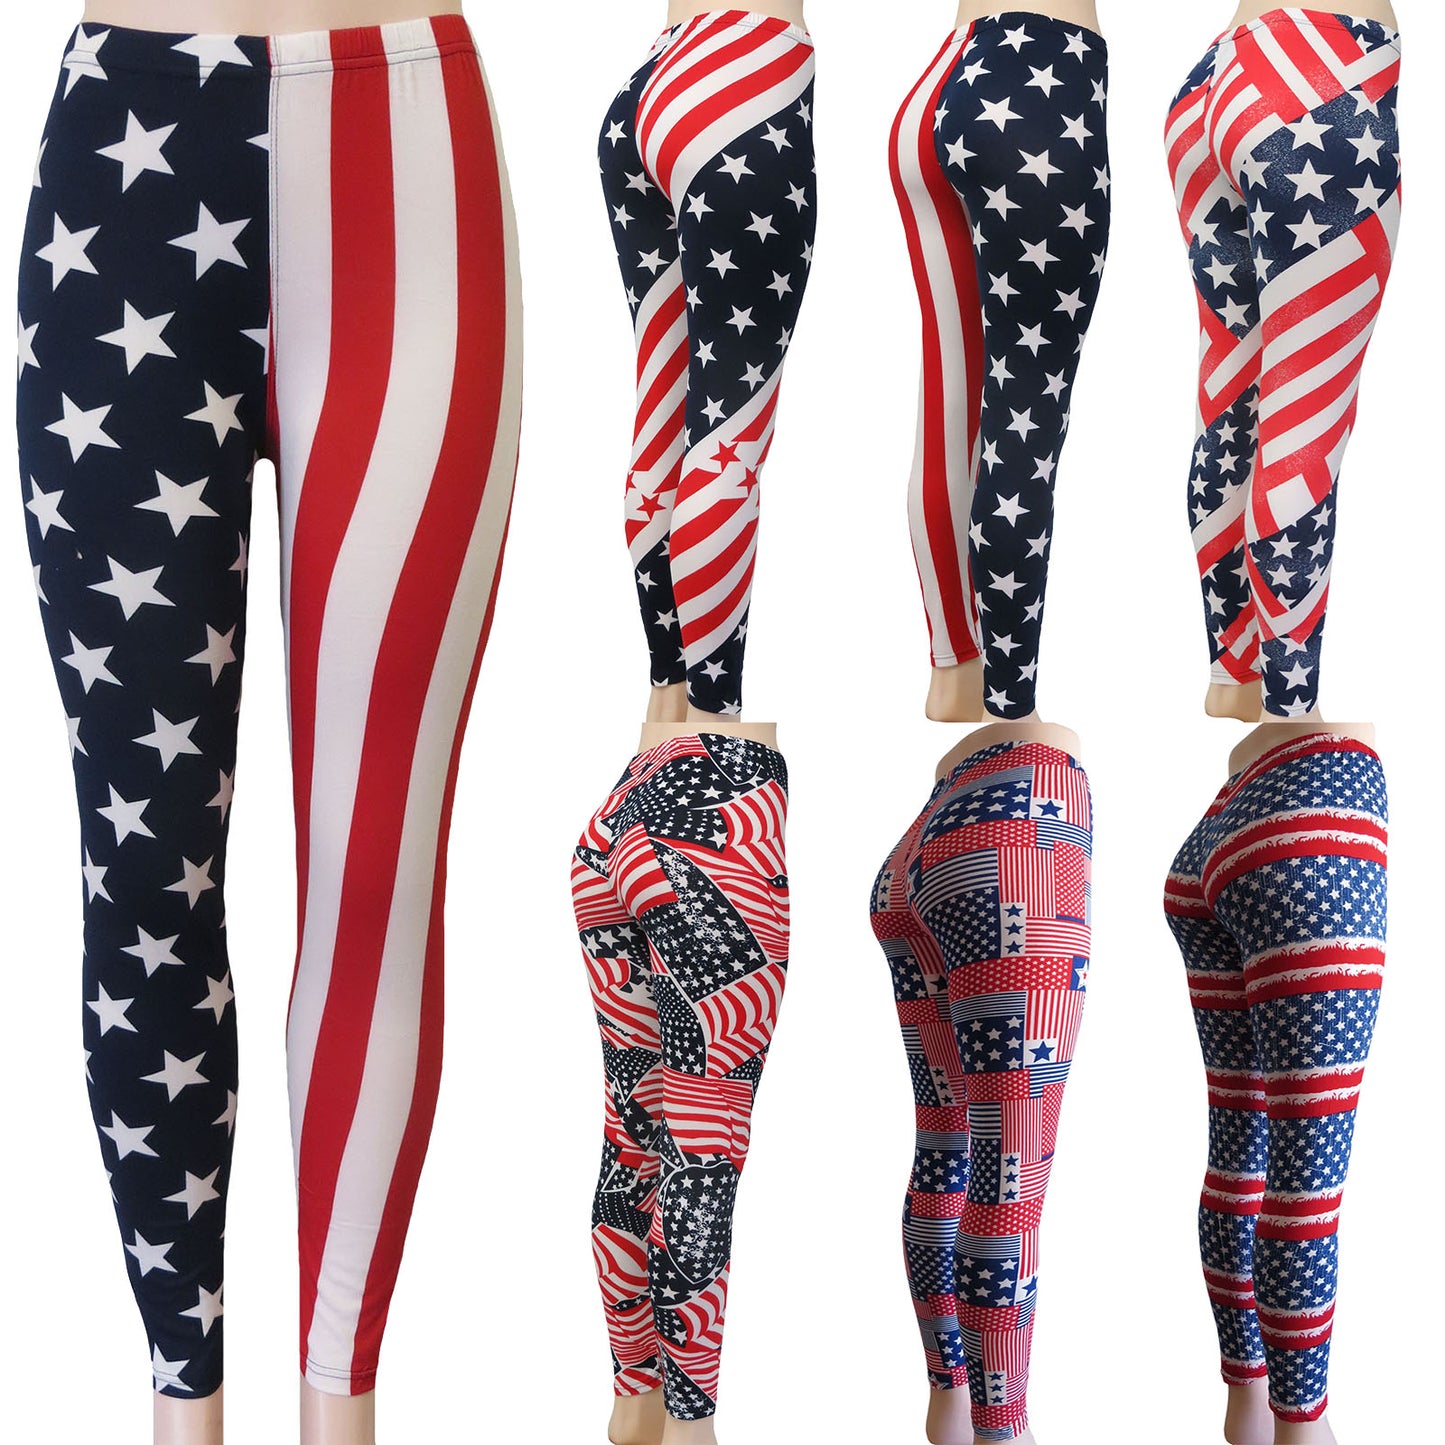 https://alessawholesale.com/cdn/shop/products/wholesale-flag-leggings-assortment-usa-stars-and-stripes-american-red-white-and-blue.jpg?v=1629391447&width=1445